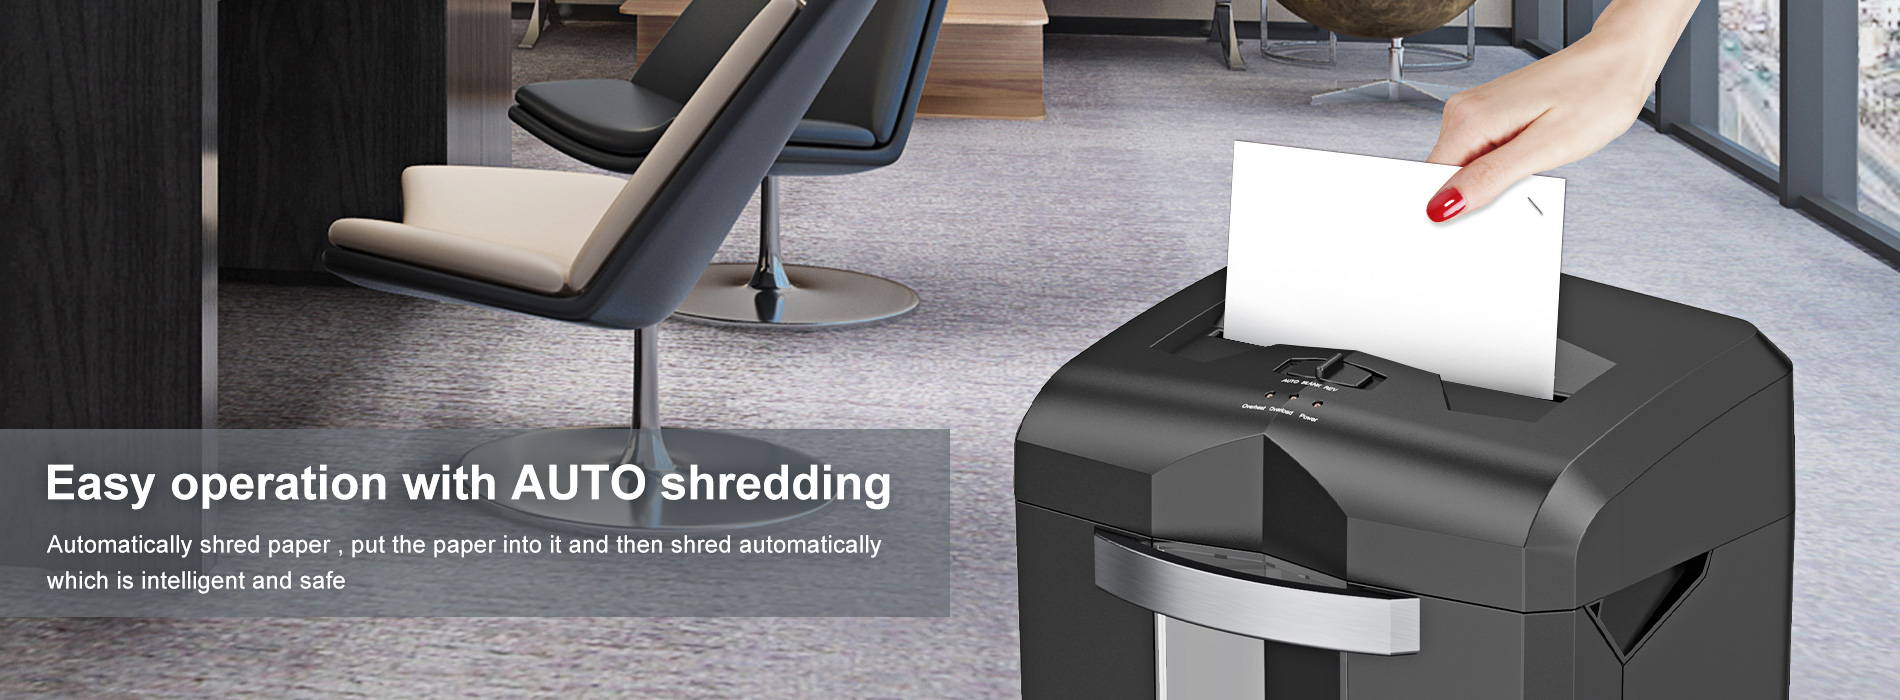 Easy operation with AUTO shredding Automatically shred paper, put the paper into it and then shred wutomatically, which is intelligent and safe.